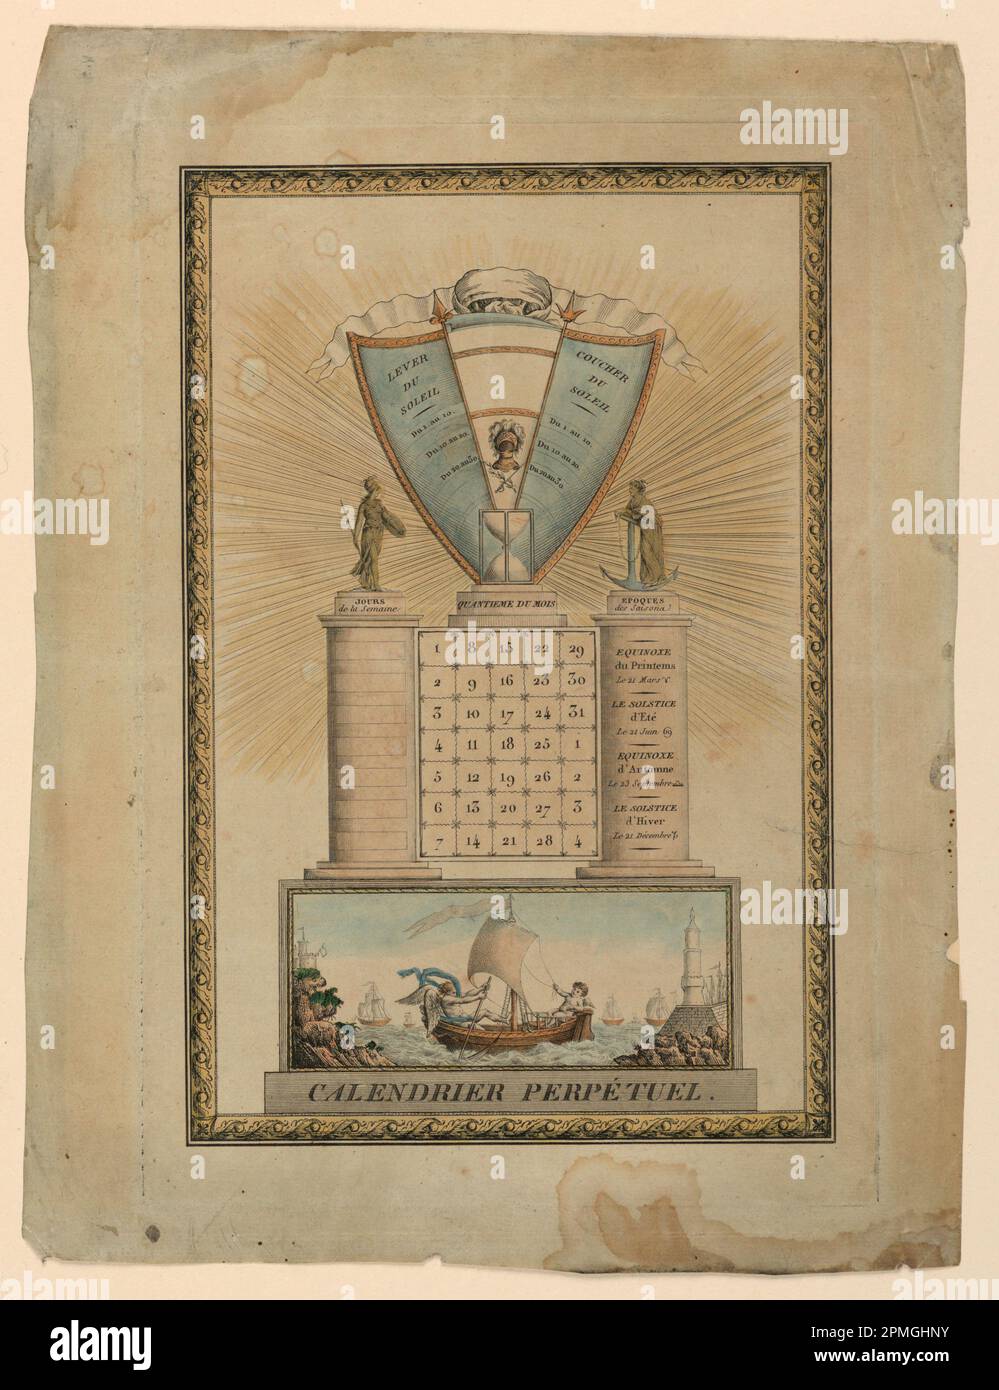 Calendar, Calendrier Perpétual; France; brush and watercolor over engraving on light blue laid paper; 35.6 x 27.0 cm (14 x 10 5/8 in. ) Stock Photo